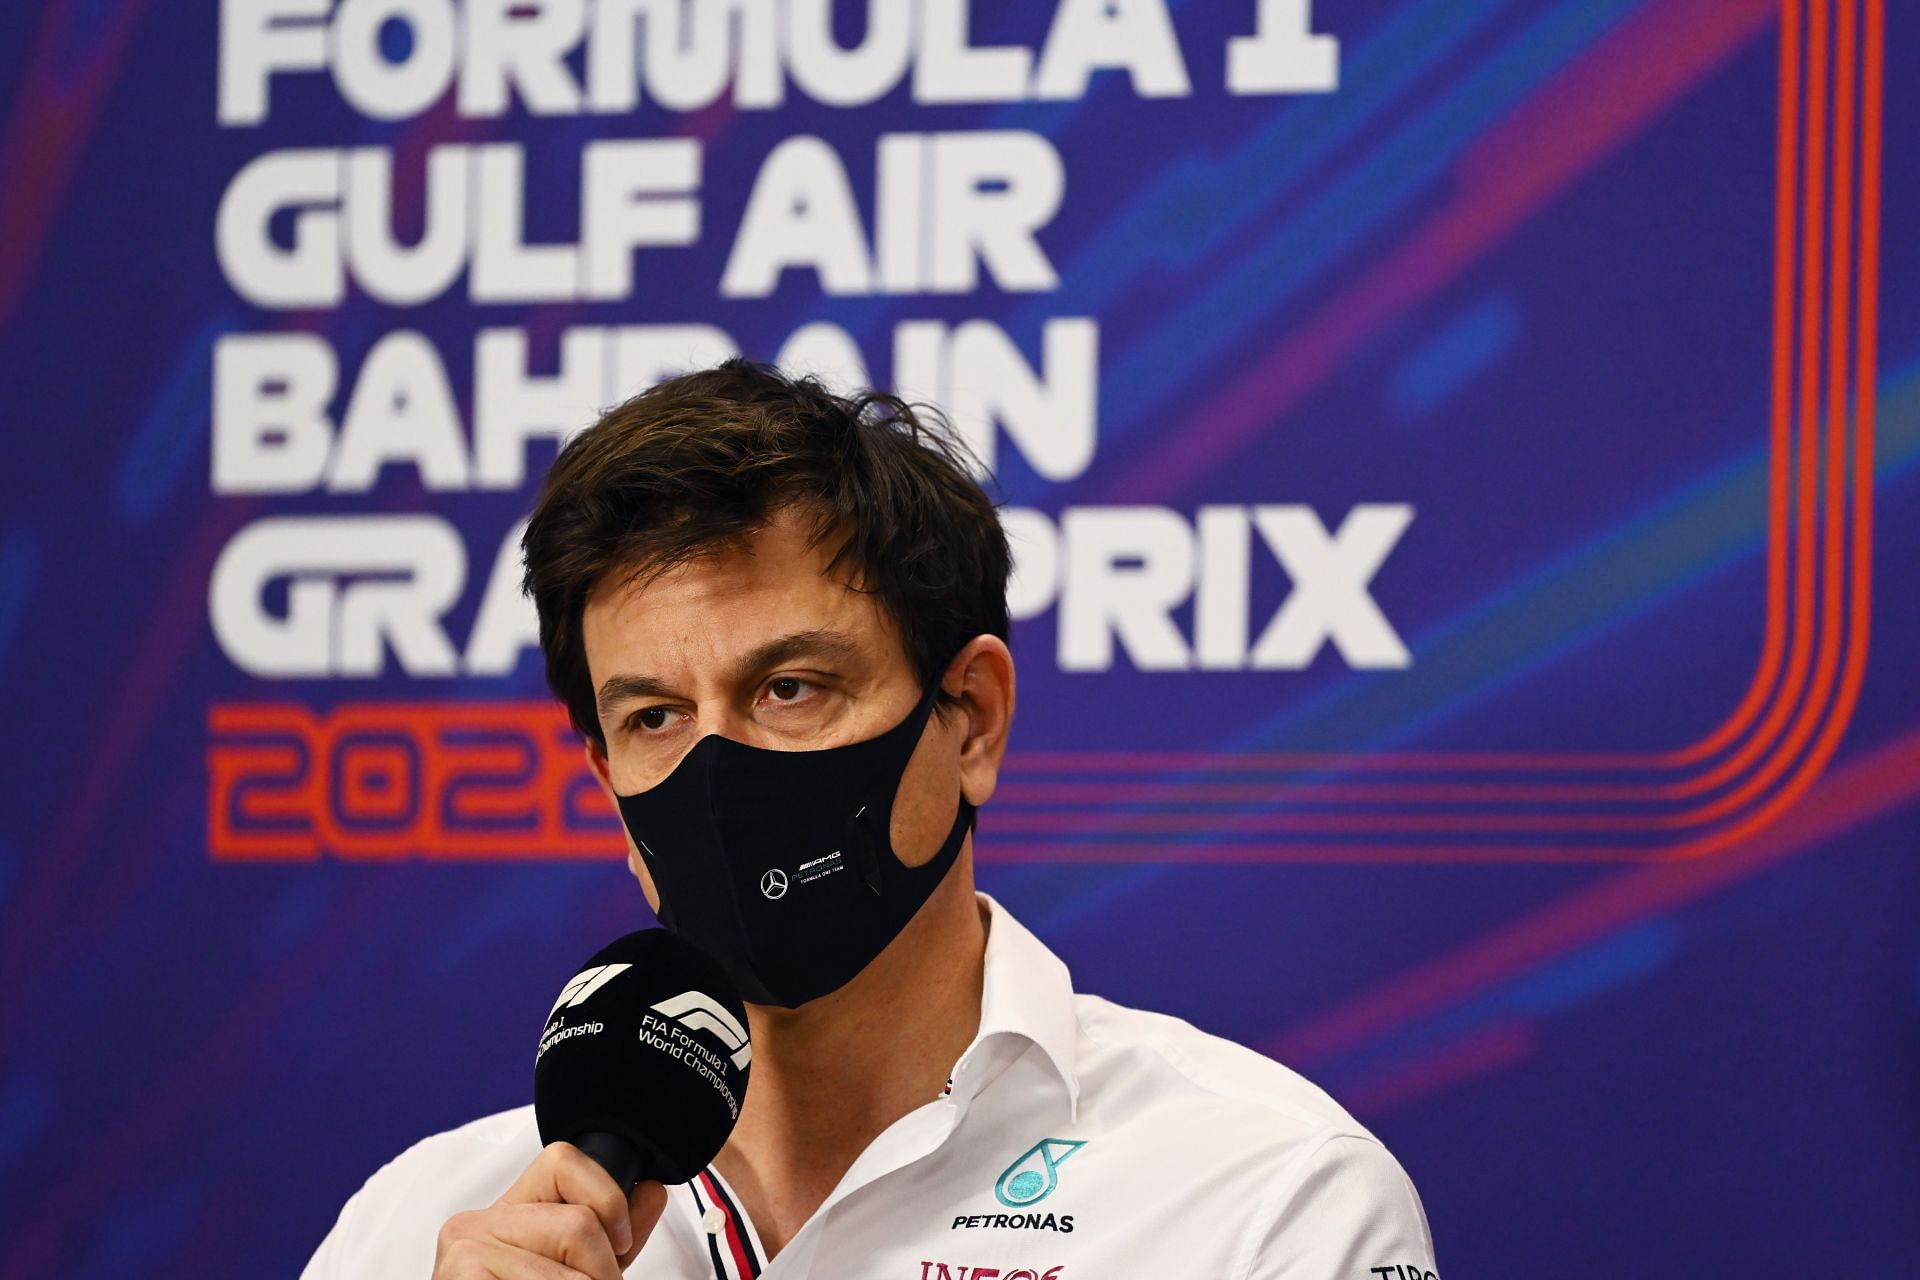 Mercedes boss Toto Wolff in conversation with the media priot to the 2022 F1 Bahrain GP. (Photo by Clive Mason/Getty Images)